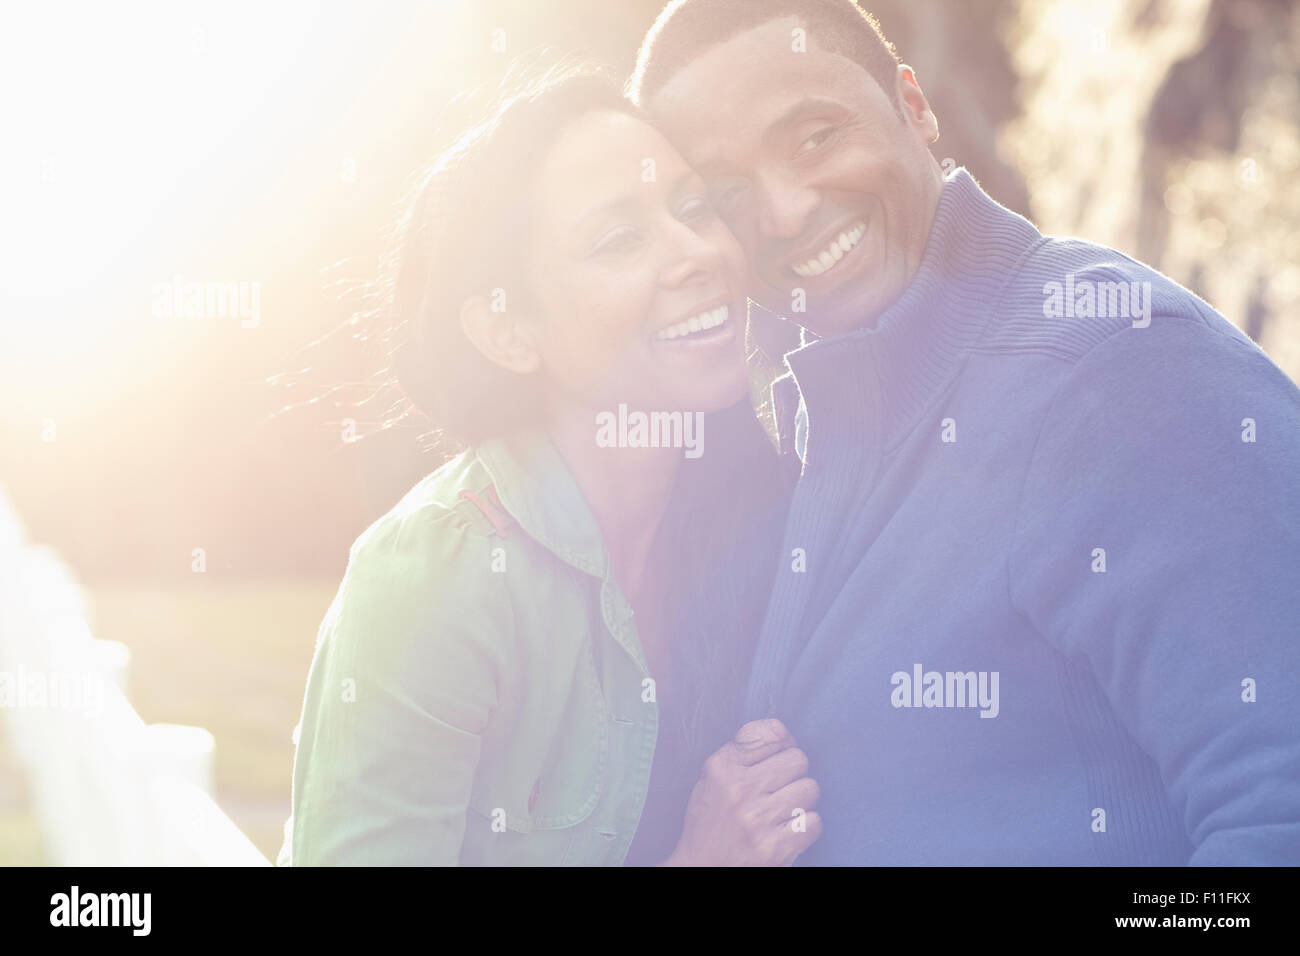 Smiling couple hugging outdoors Stock Photo